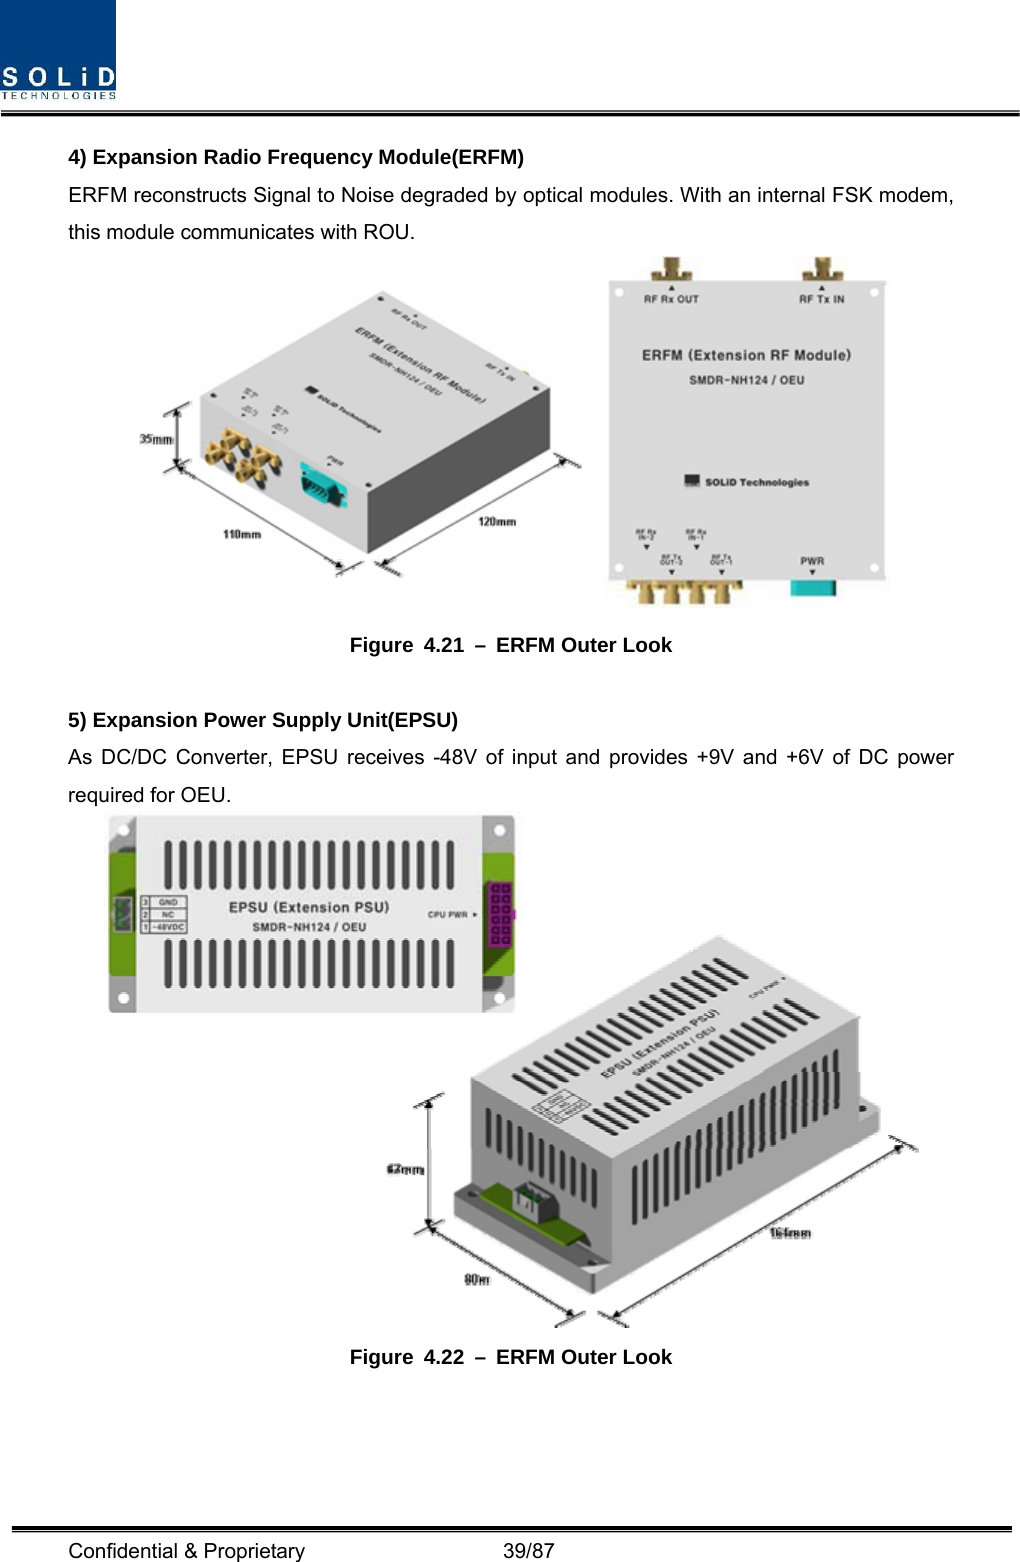  Confidential &amp; Proprietary                   39/87 4) Expansion Radio Frequency Module(ERFM) ERFM reconstructs Signal to Noise degraded by optical modules. With an internal FSK modem, this module communicates with ROU.  Figure 4.21 – ERFM Outer Look  5) Expansion Power Supply Unit(EPSU) As DC/DC Converter, EPSU receives -48V of input and provides +9V and +6V of DC power required for OEU.  Figure 4.22 – ERFM Outer Look  